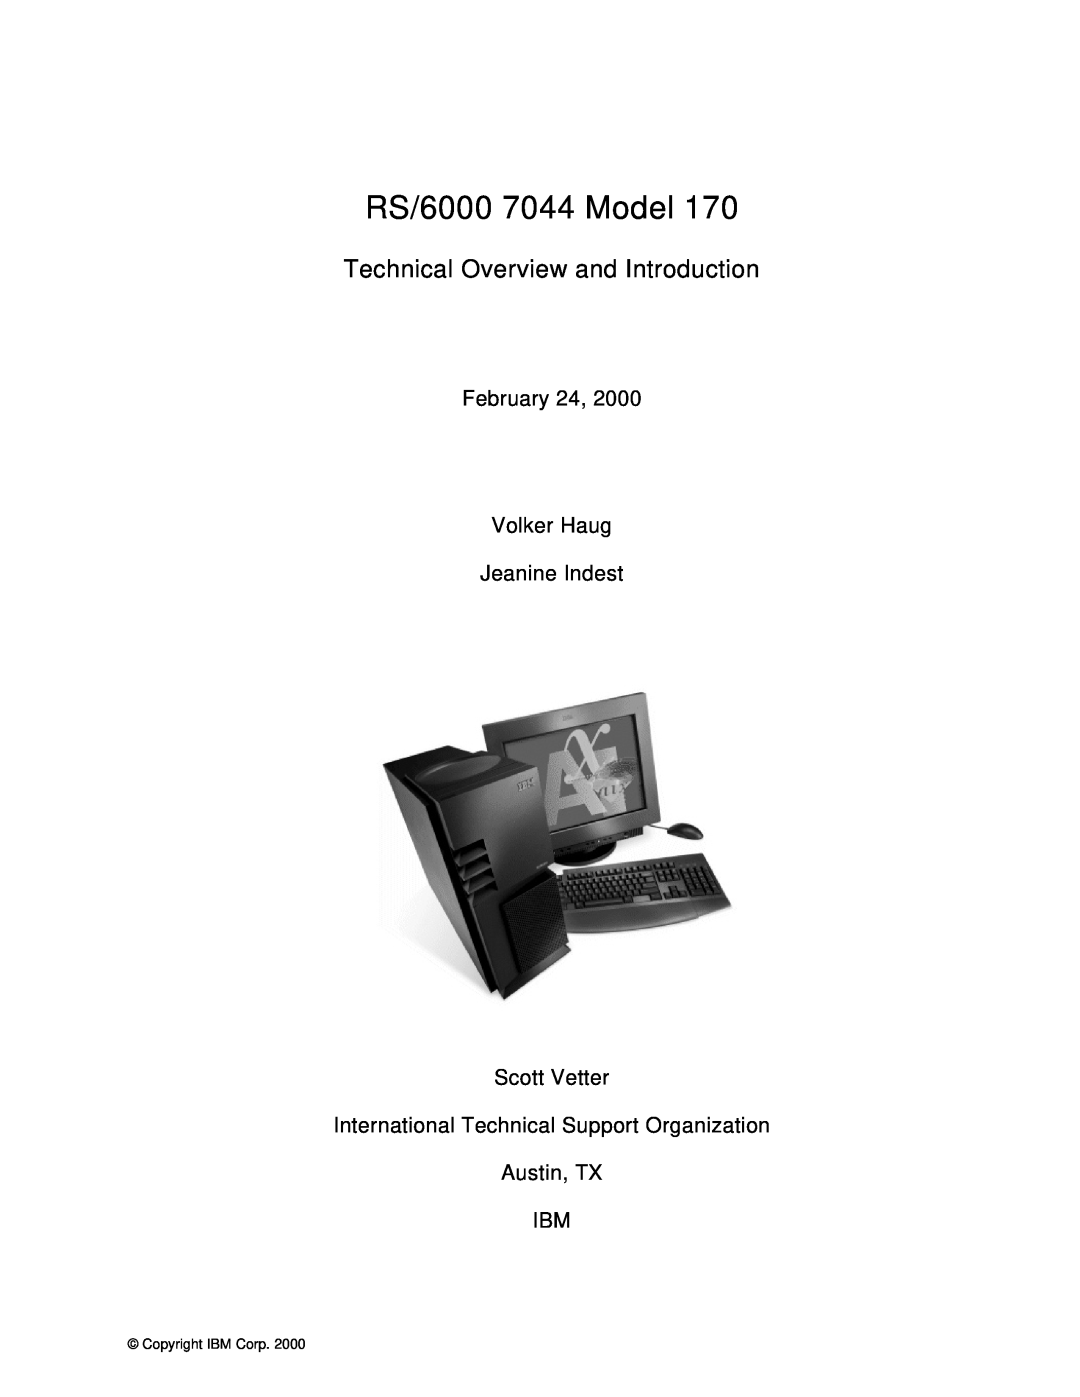 IBM 170 manual RS/6000 7044 Model, Technical Overview and Introduction 